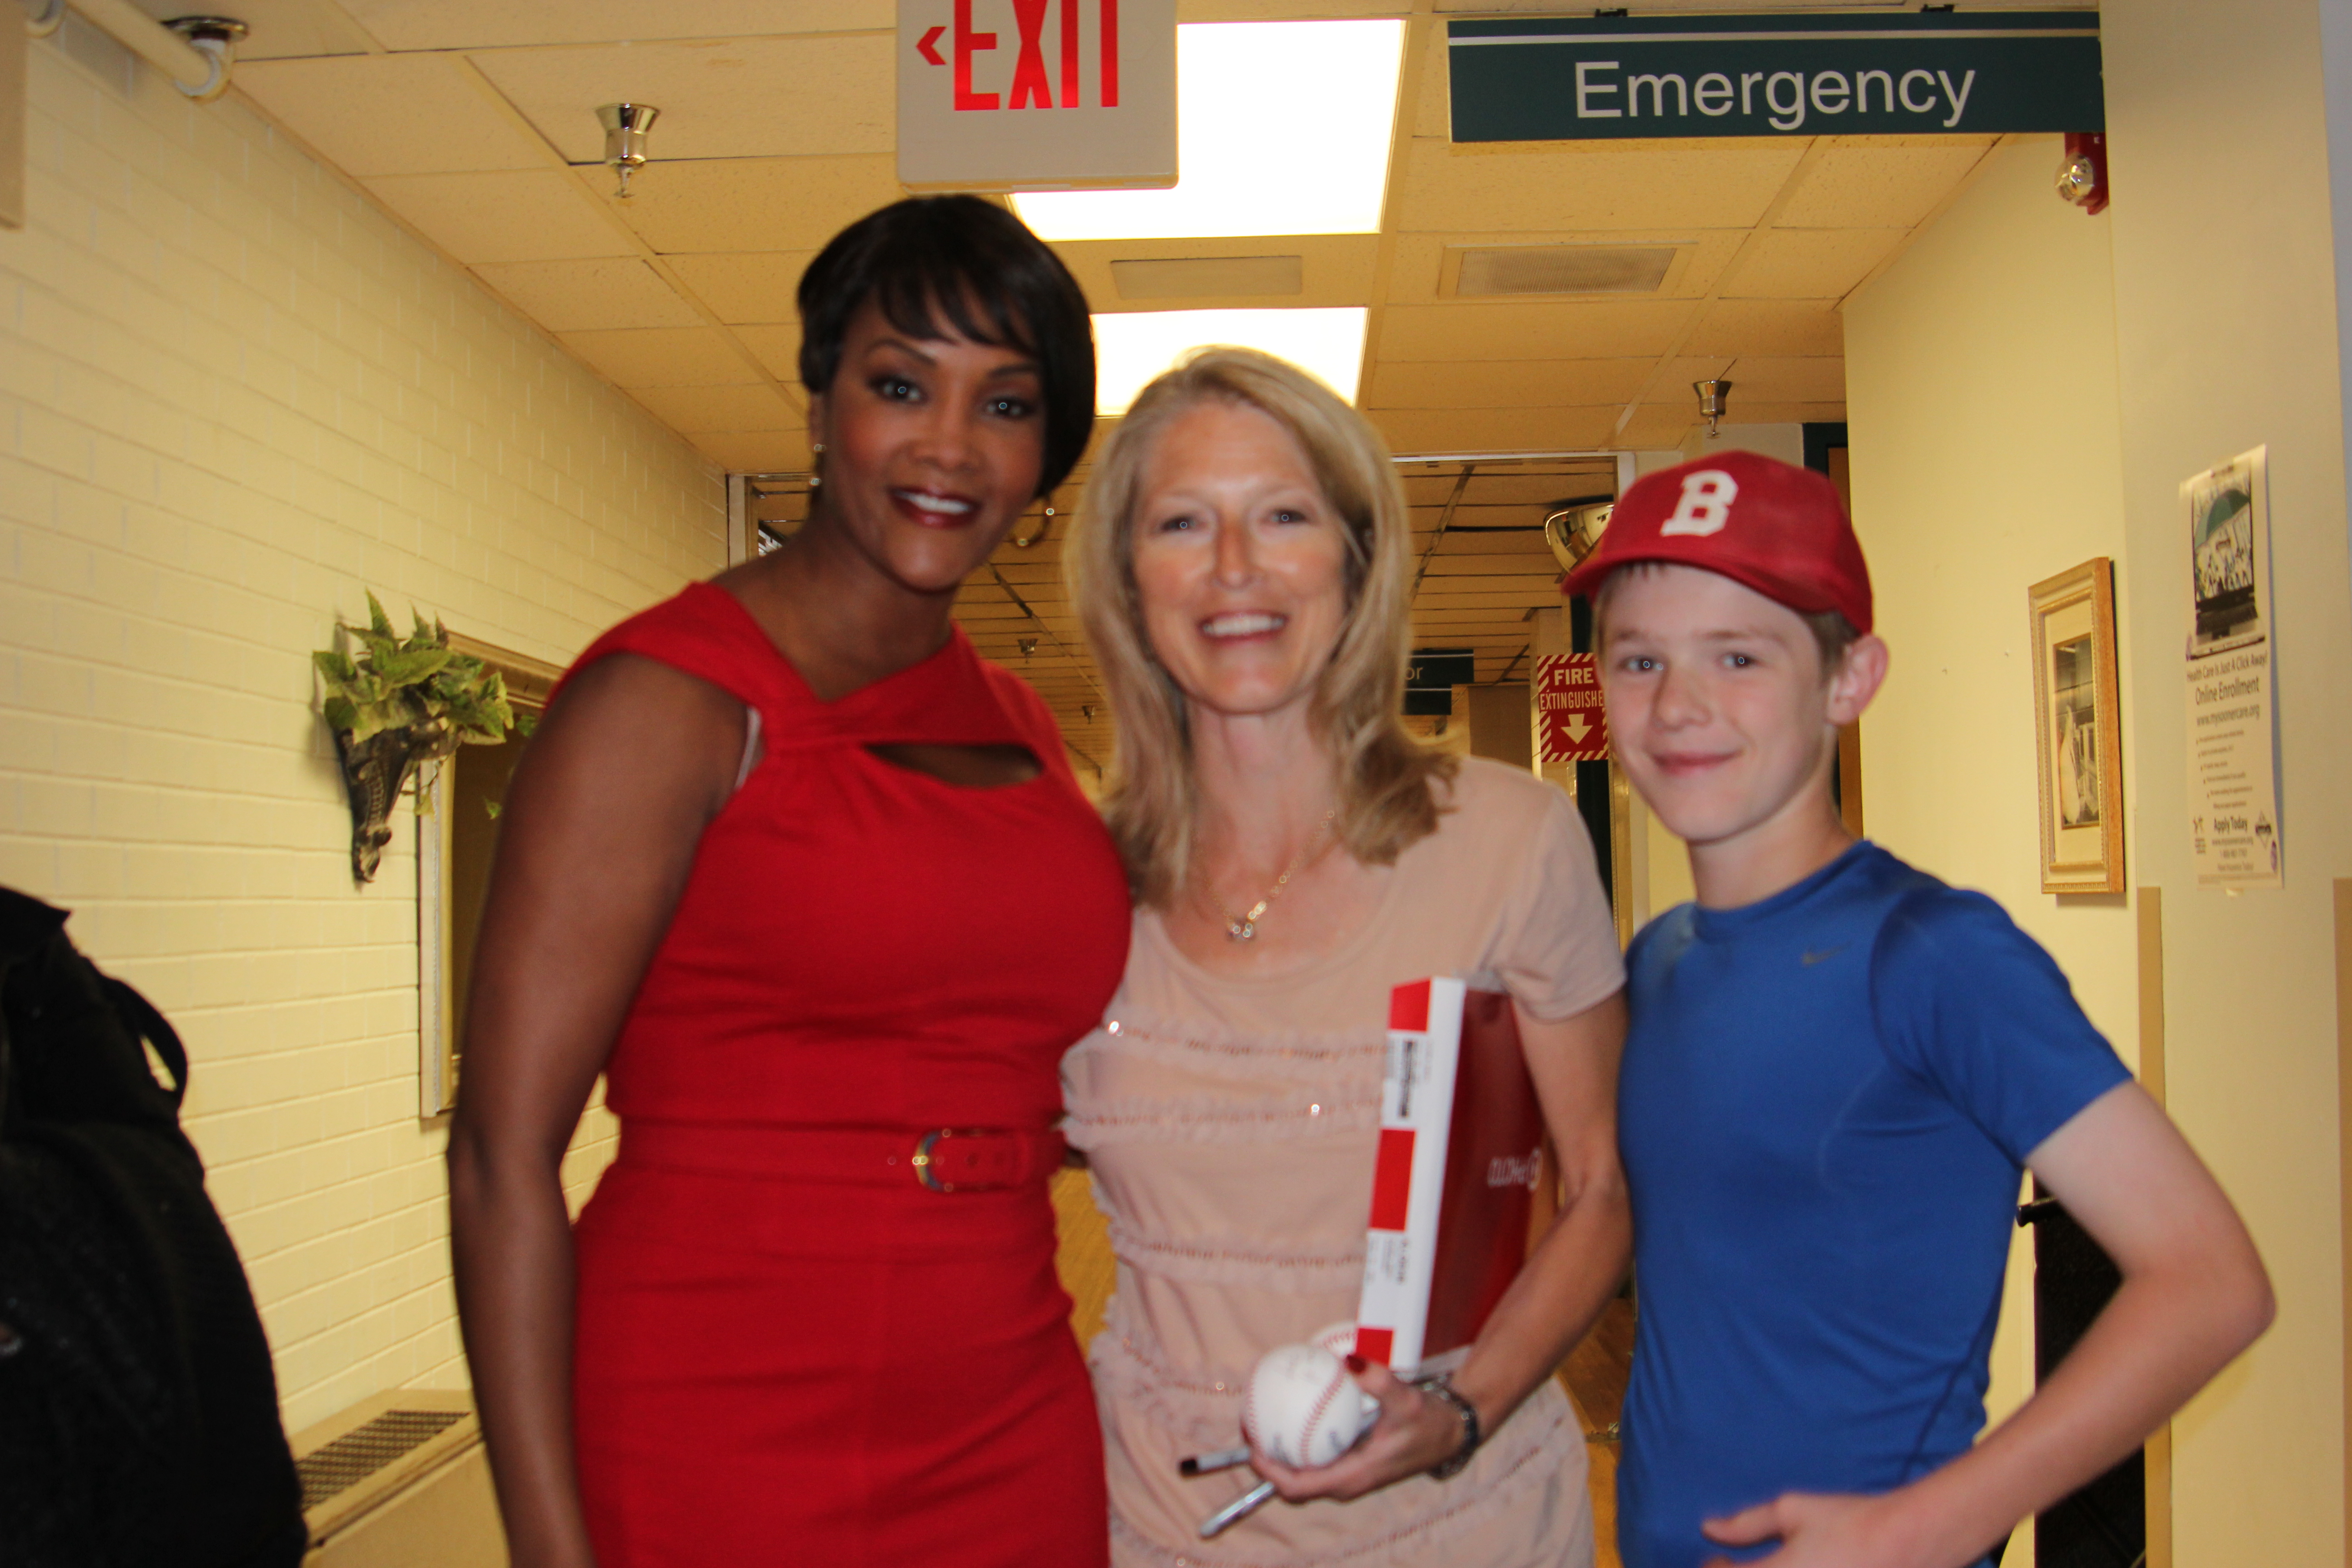 Spending a few moments between scenes at the Okmulgee hospital with Vivica Fox.